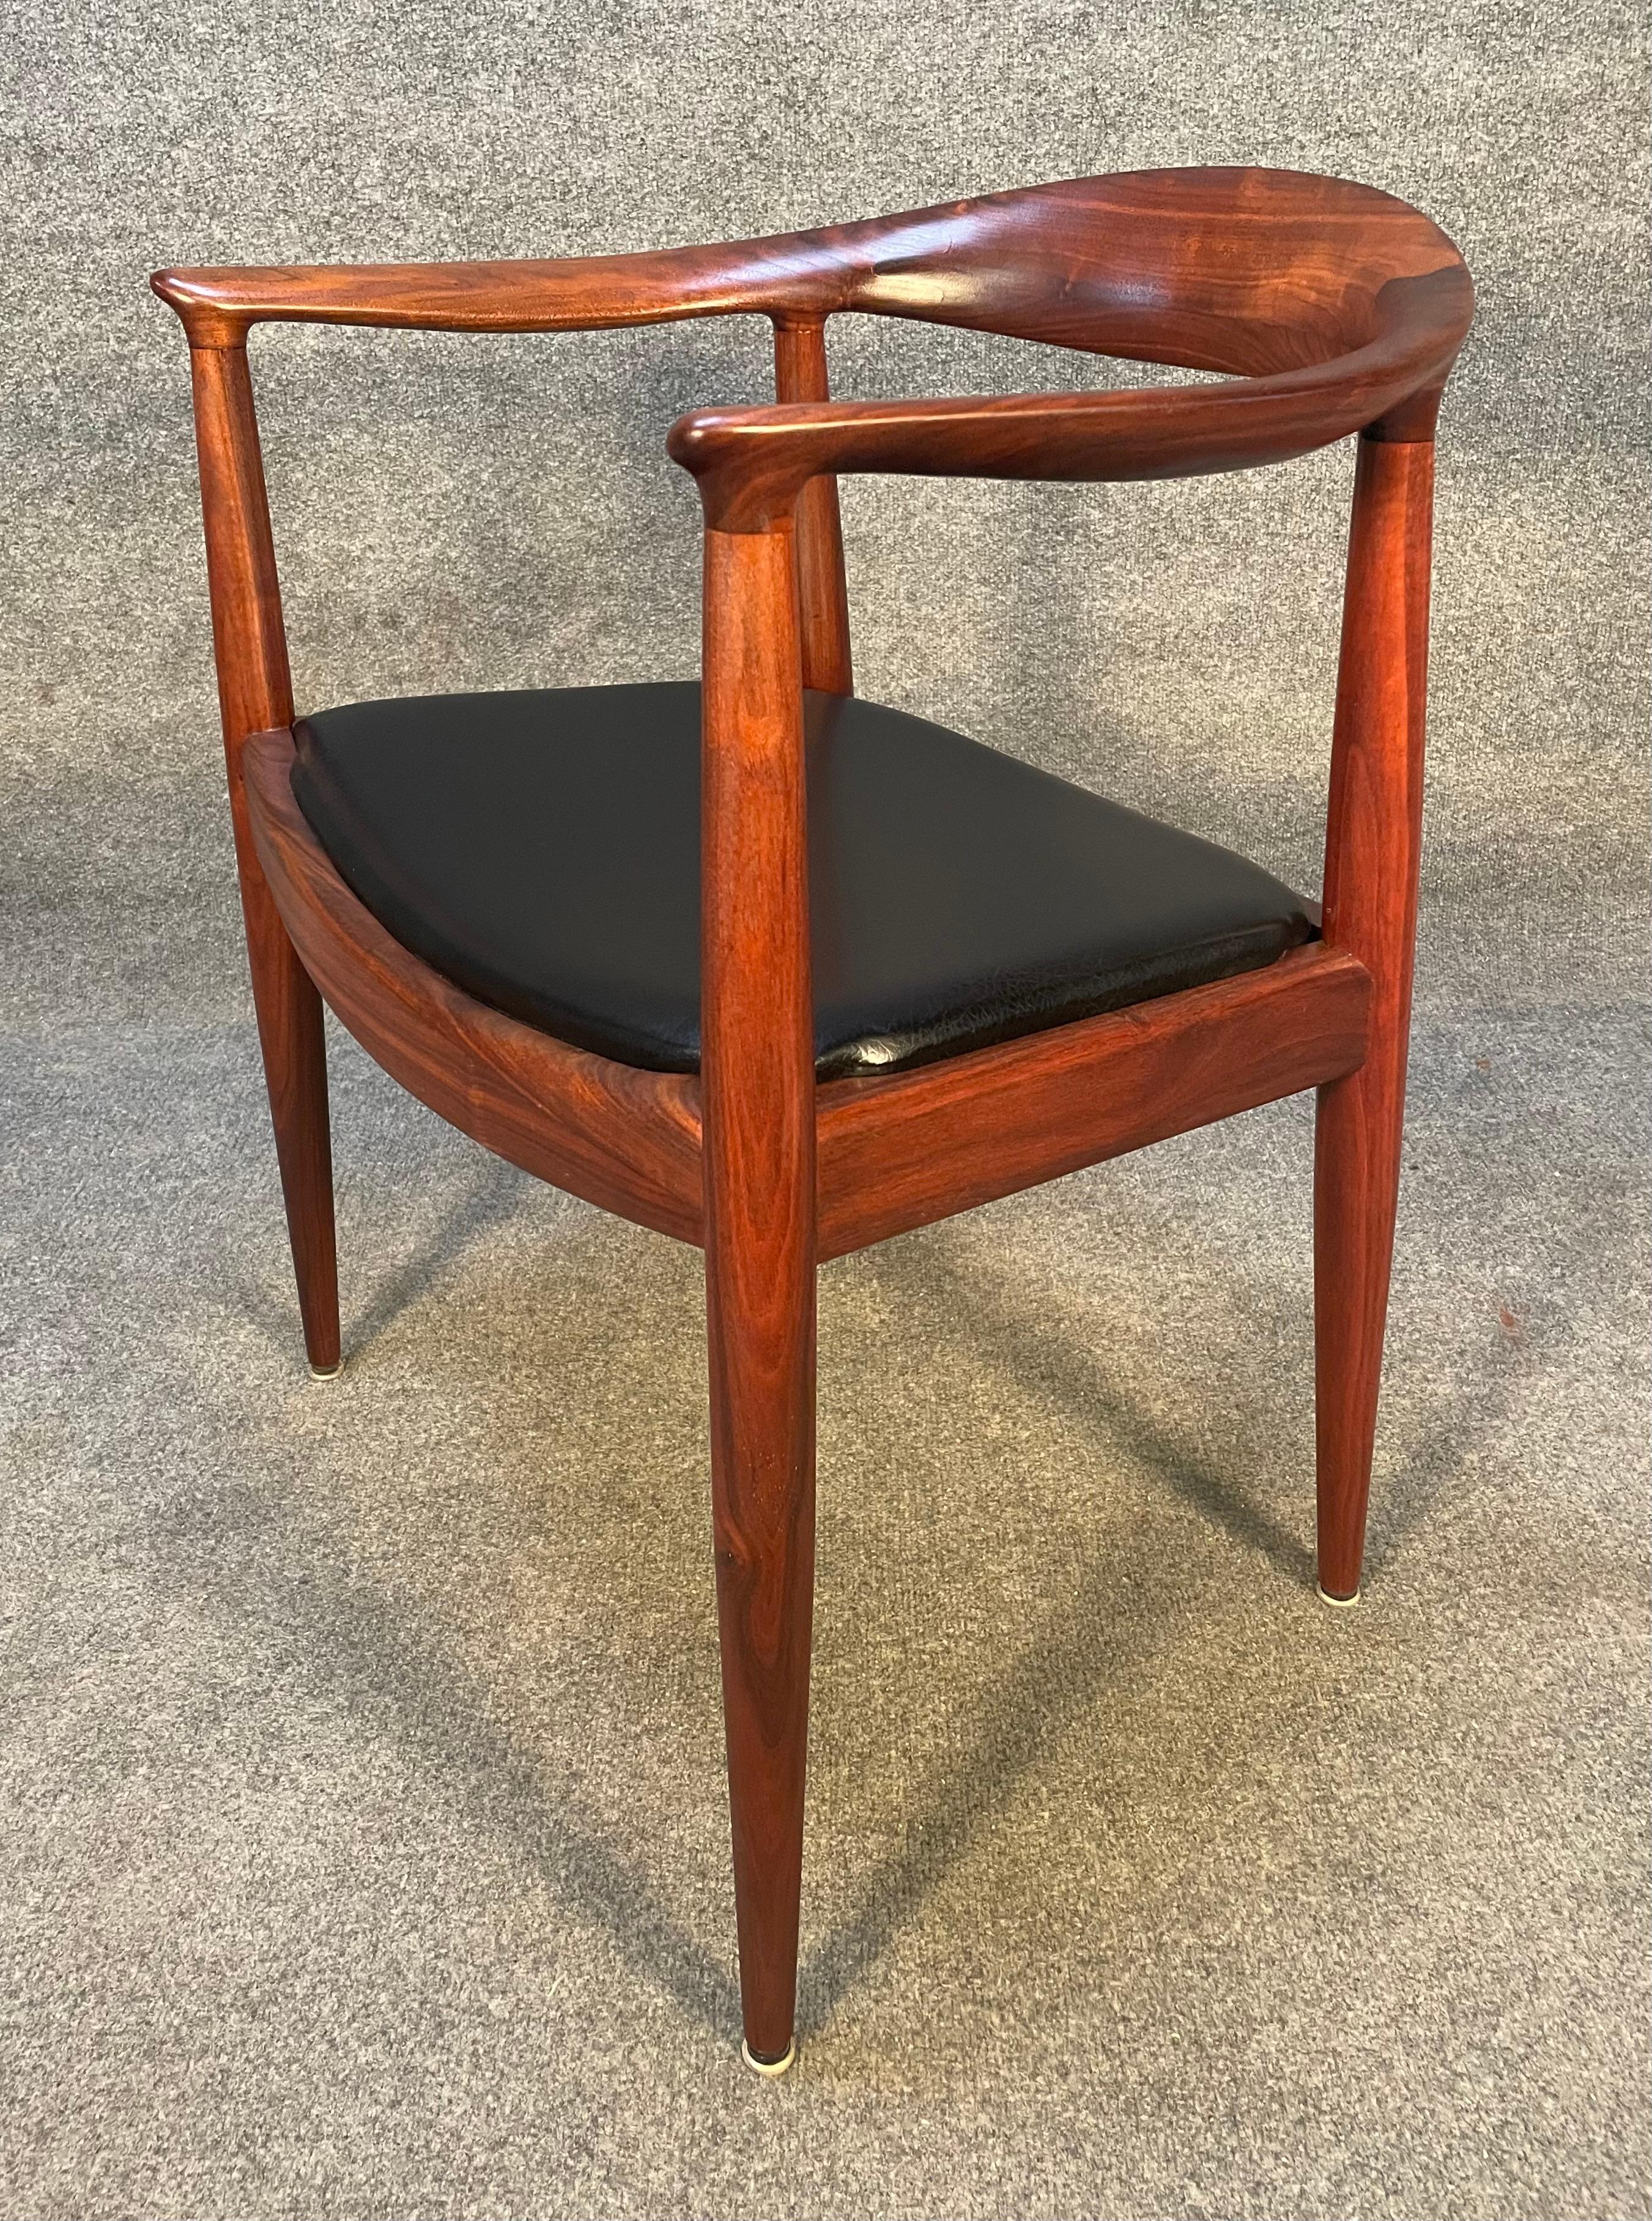 Here is a beautiful accent chair reminiscent of the famed 